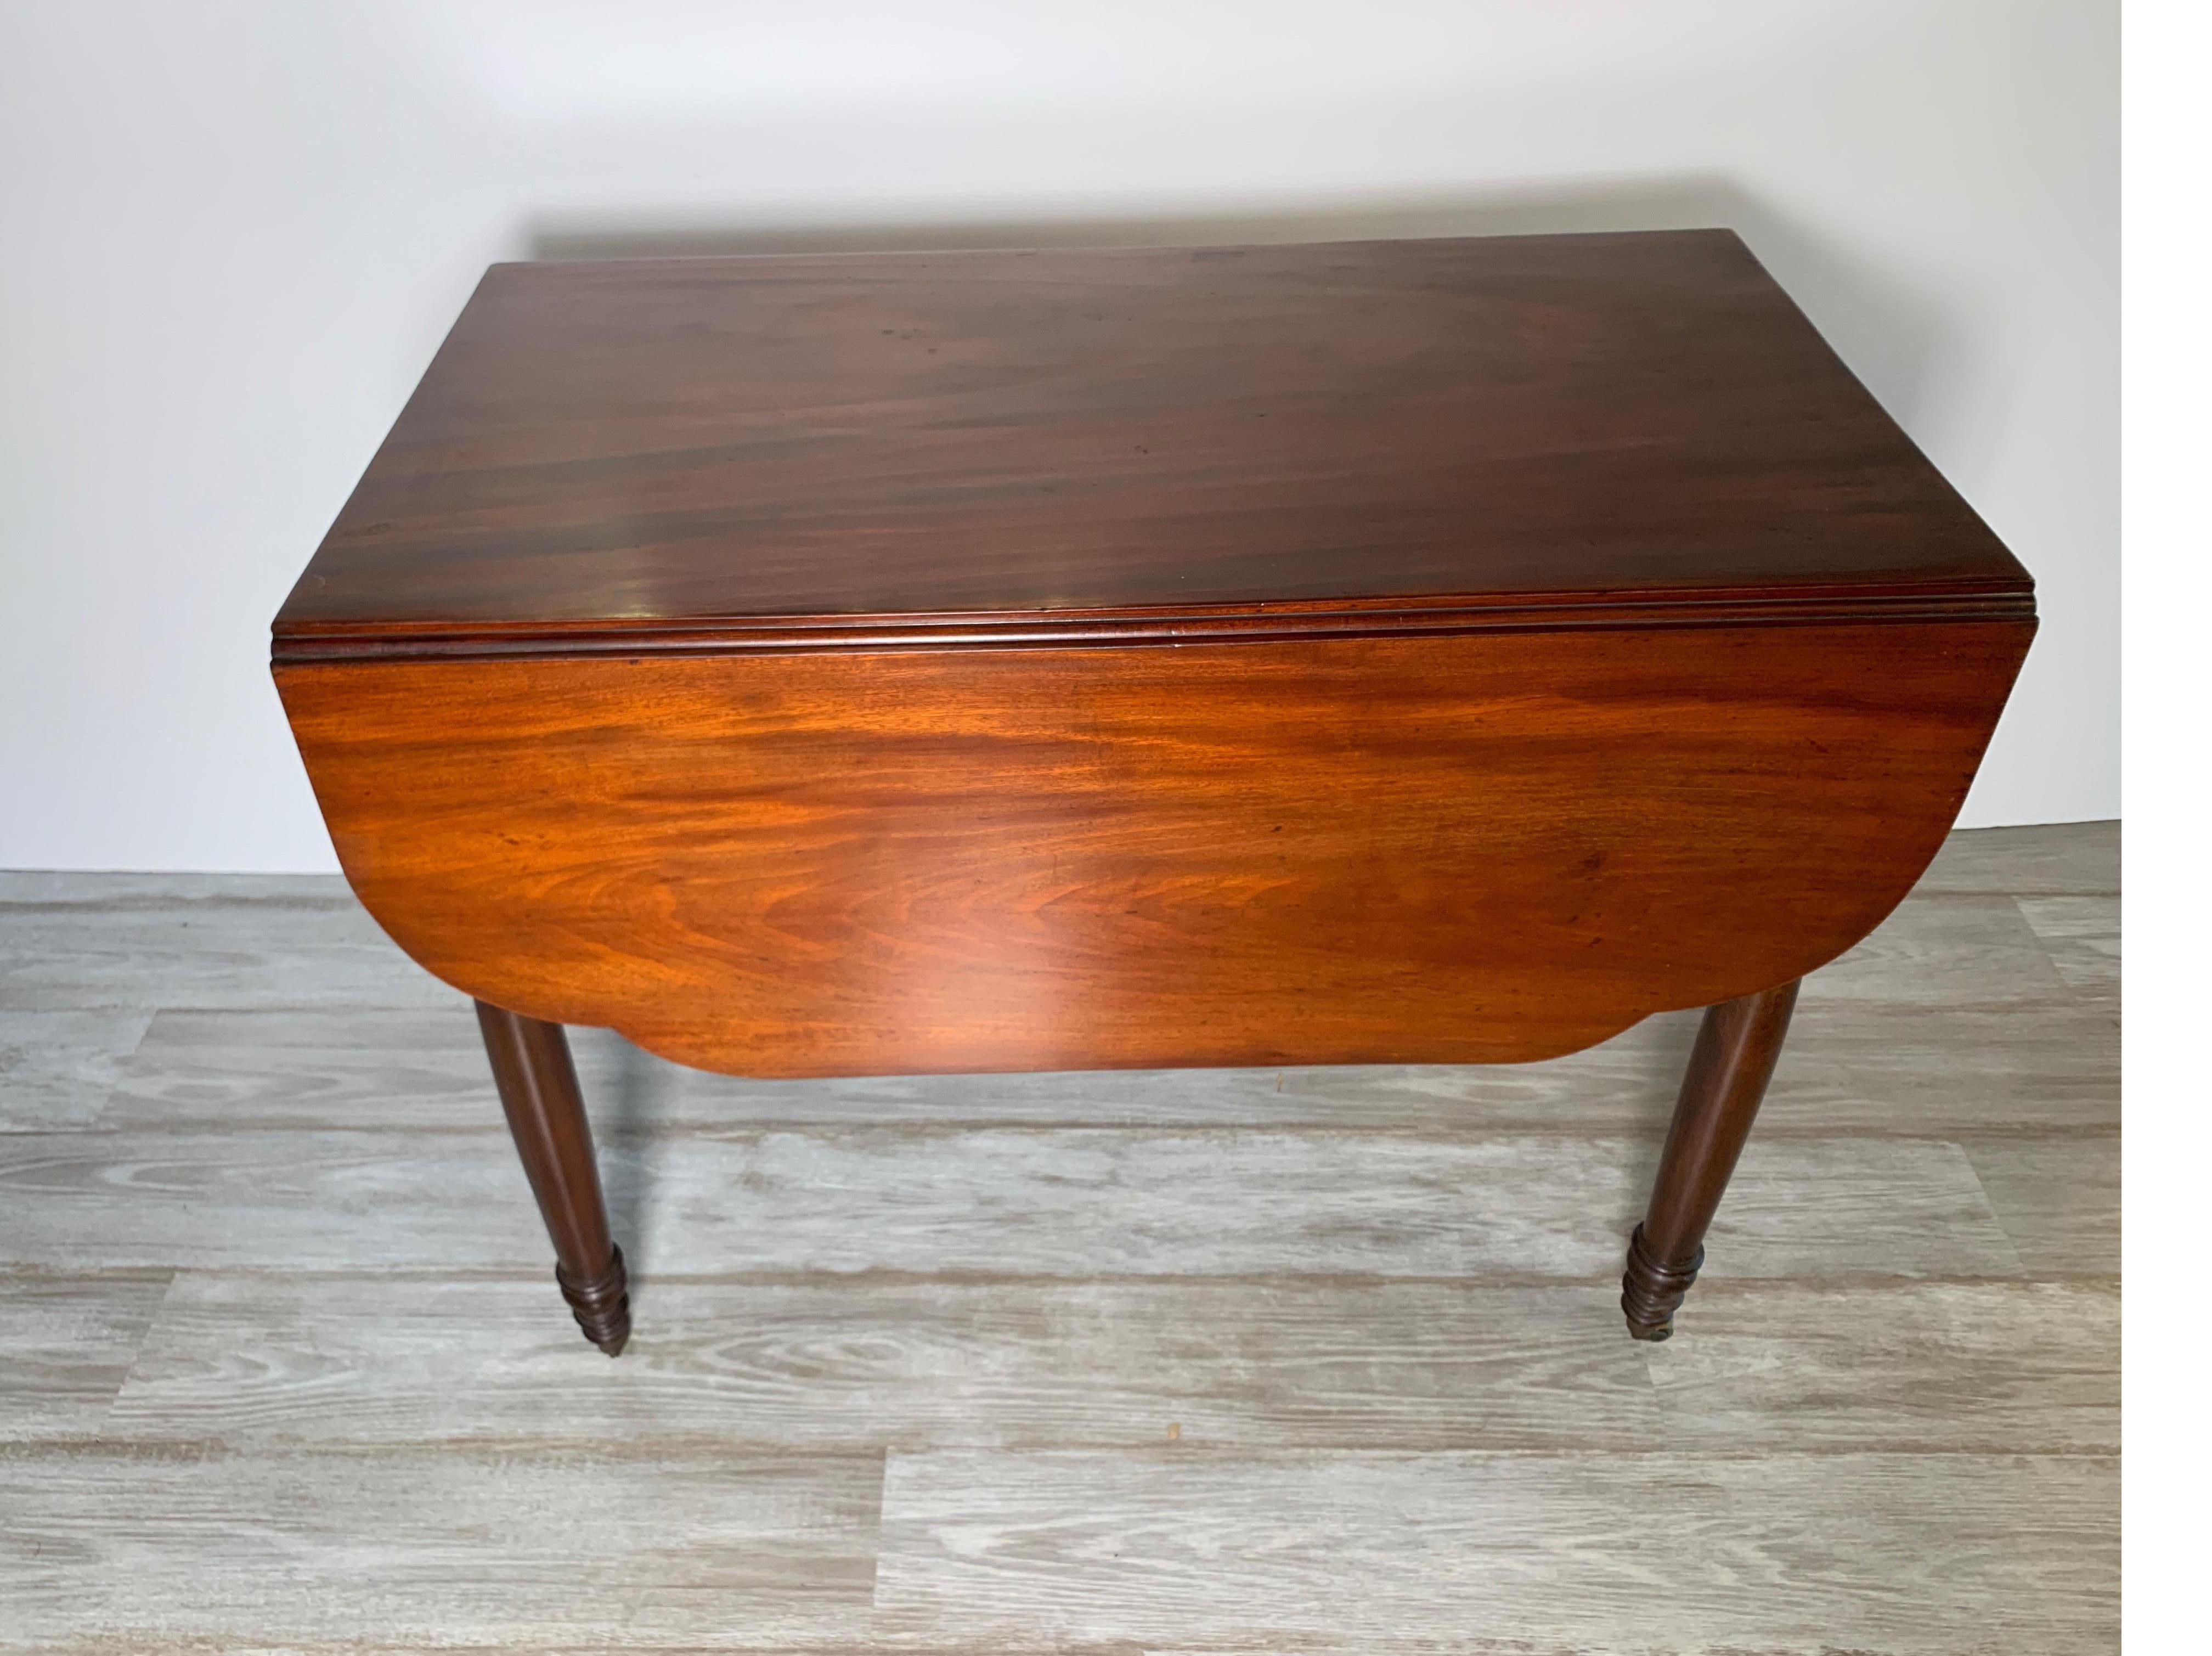 Antique medium sized solid mahogany drop-leaf table with hand-turned legs. The table with two scalloped leaves which open to 46 inches when closed 20.5 inches, 36 inches deep. Original finish showing age lightening but with a recent polish.